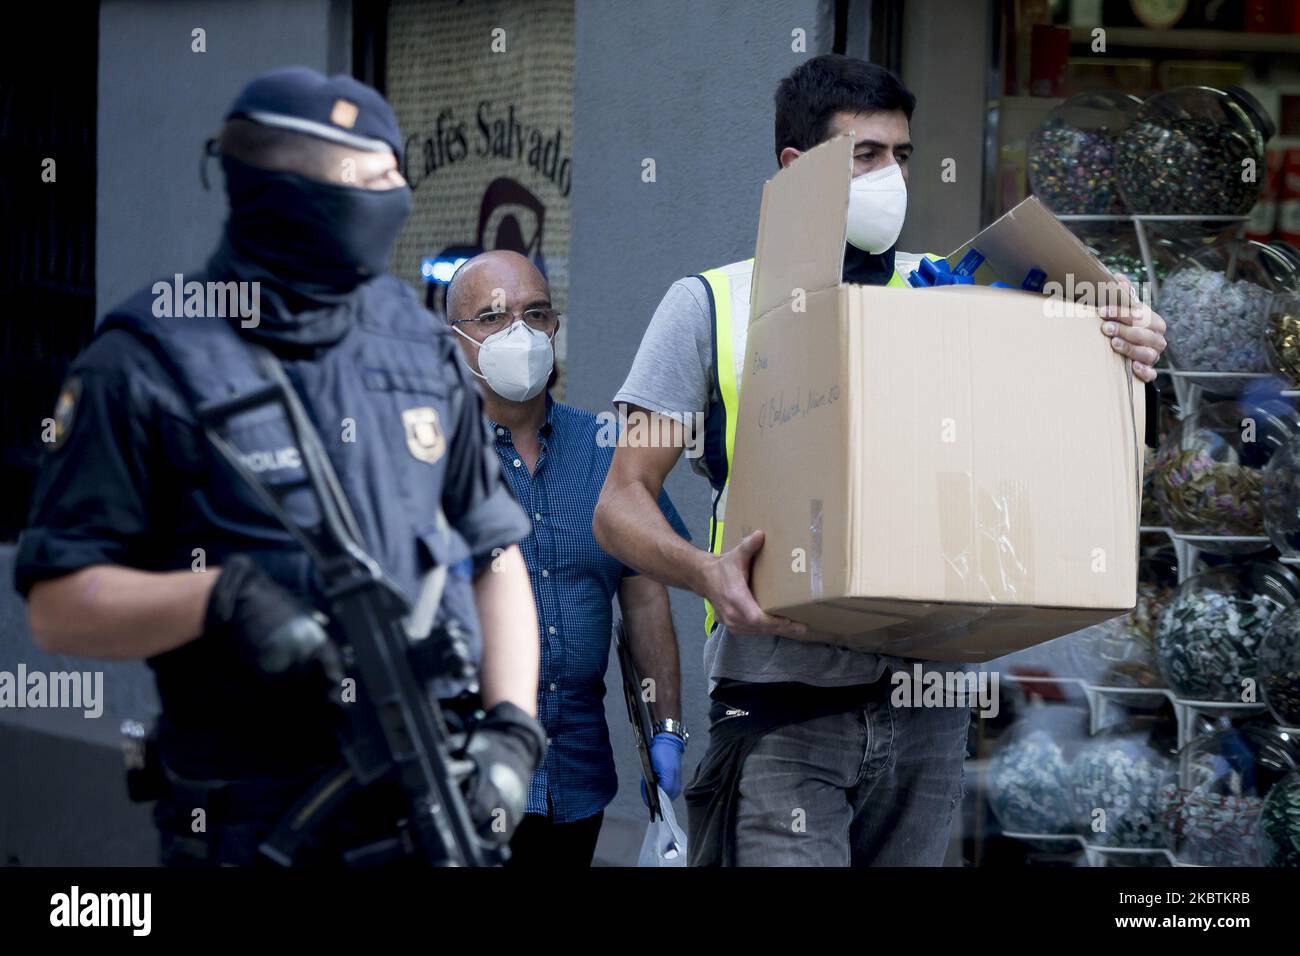 Members of the Catalan regional police force Mossos d'Esquadra stand guard during an counter-terrorism operation in Barcelona, on July 14, 2020. The Catalan Police, the Mossos d'Esquadra, arrested two people. These are the two main objectives of the operation, supervised by the central court of instruction number 6 of the Spanish High Court. (Photo by Albert Llop/NurPhoto) Stock Photo